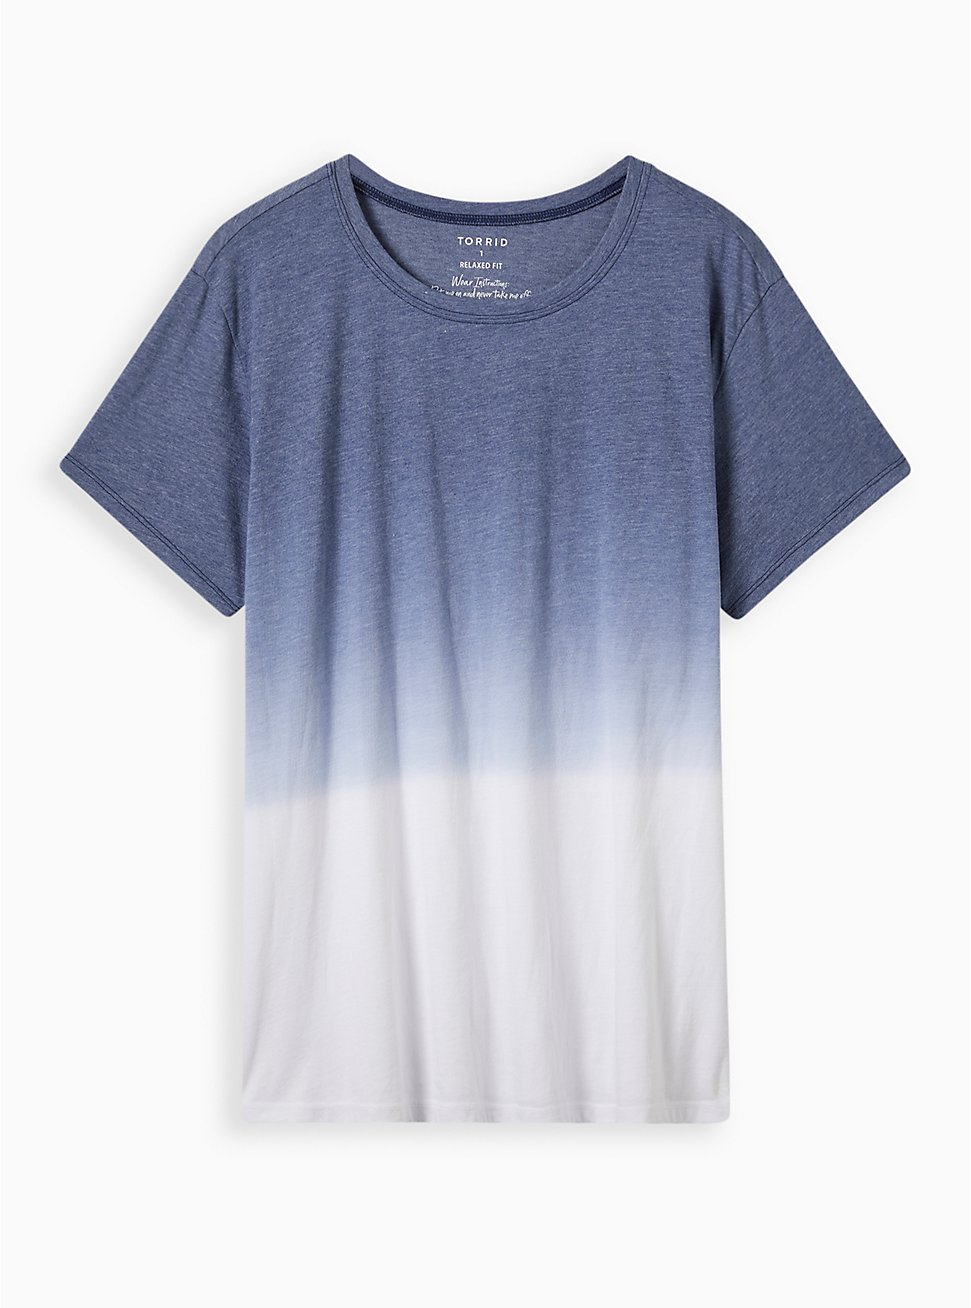 Relaxed Fit Tee - Signature Jersey Dip-Dye Navy, OTHER PRINTS, hi-res